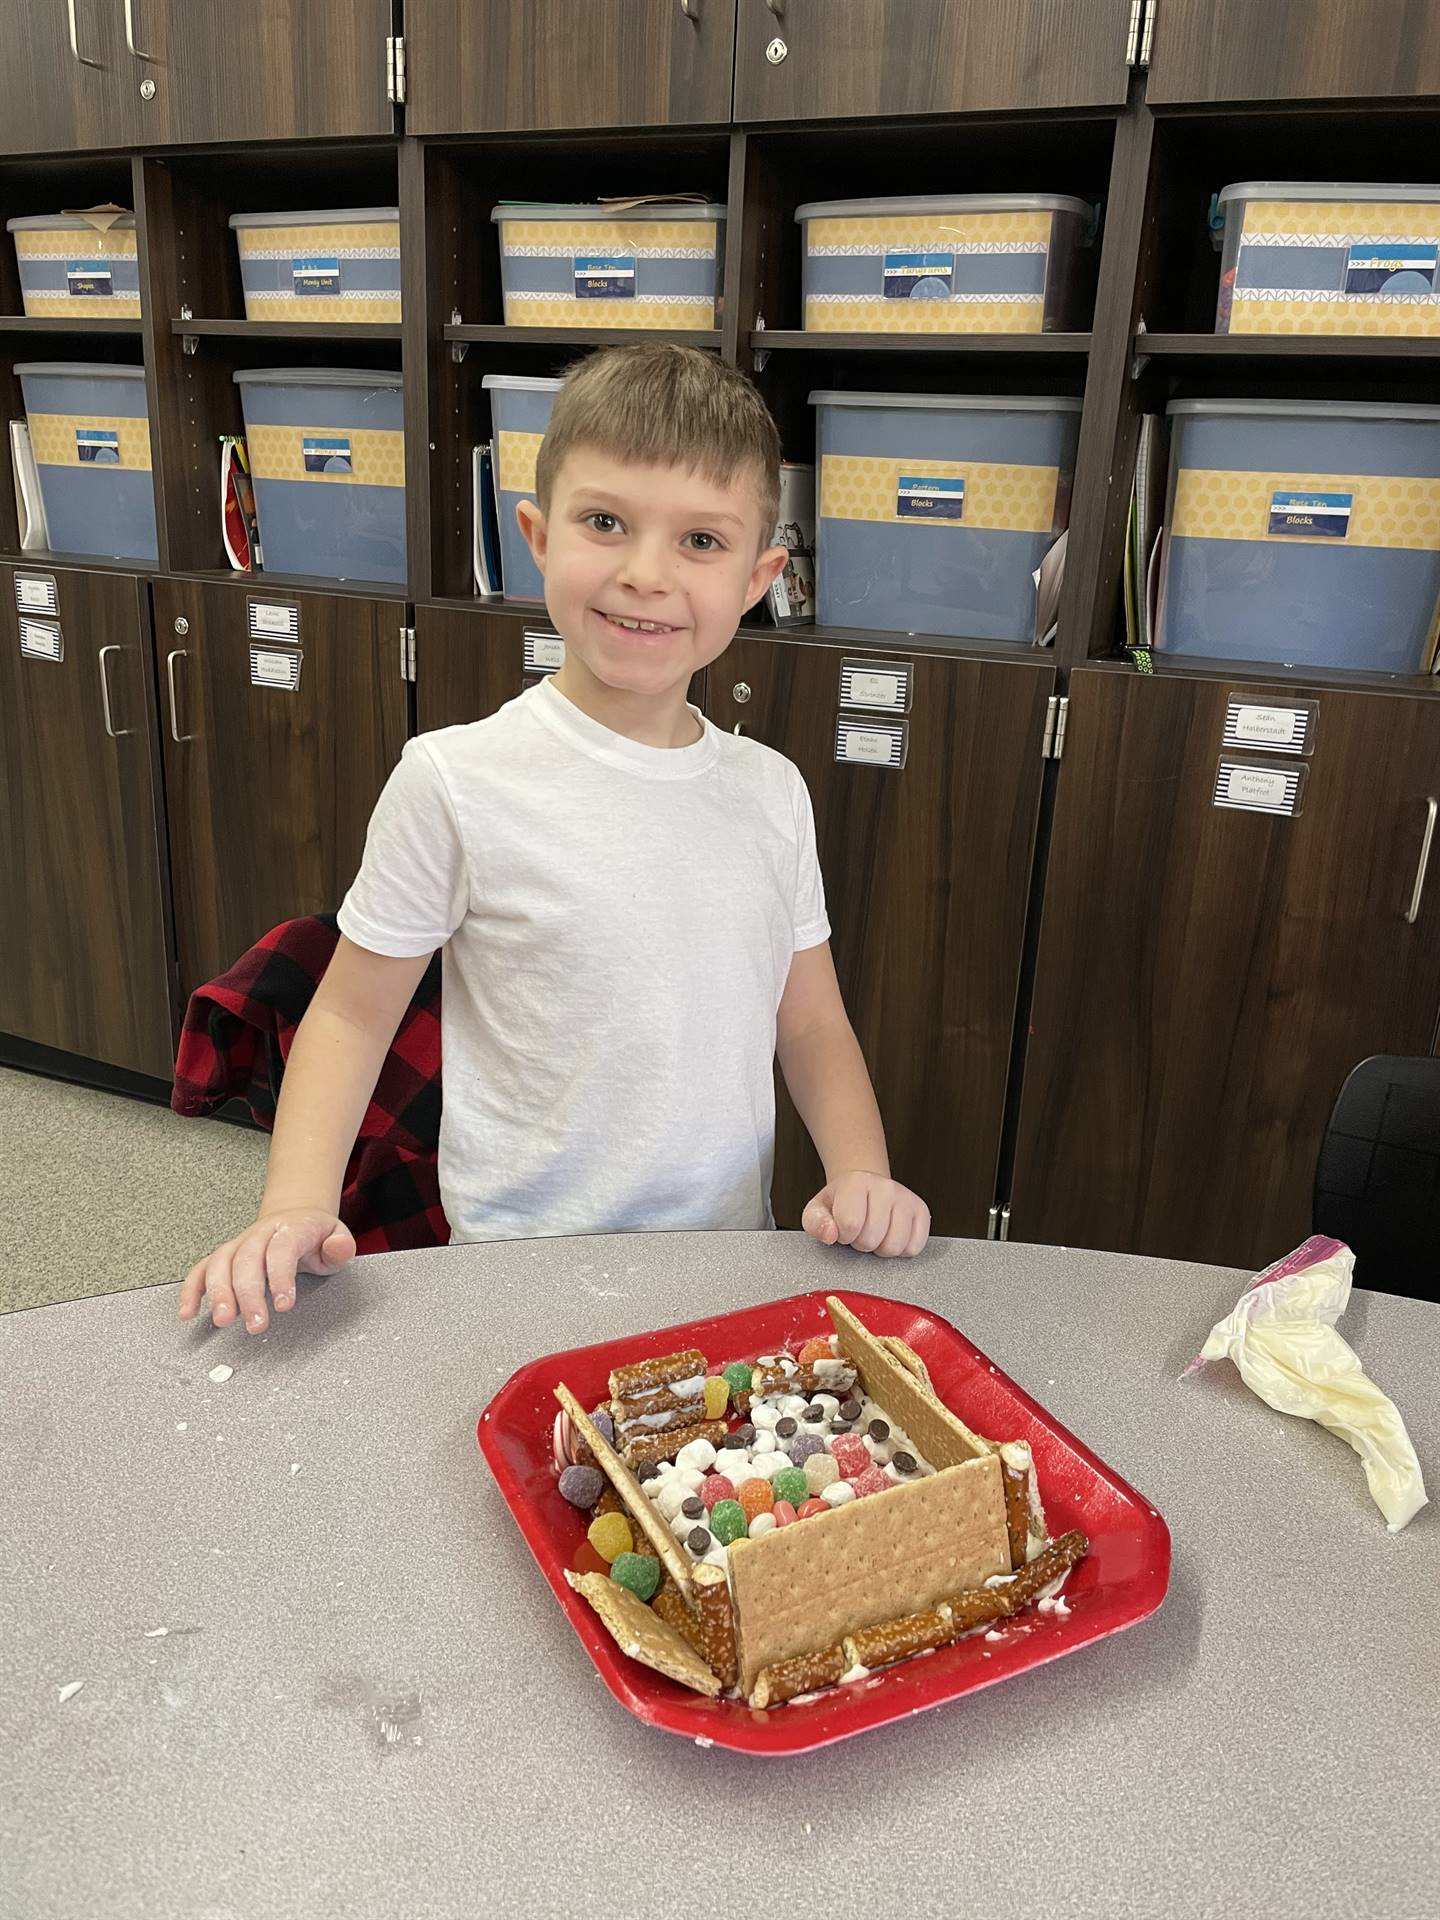 Cash with gingerbread house